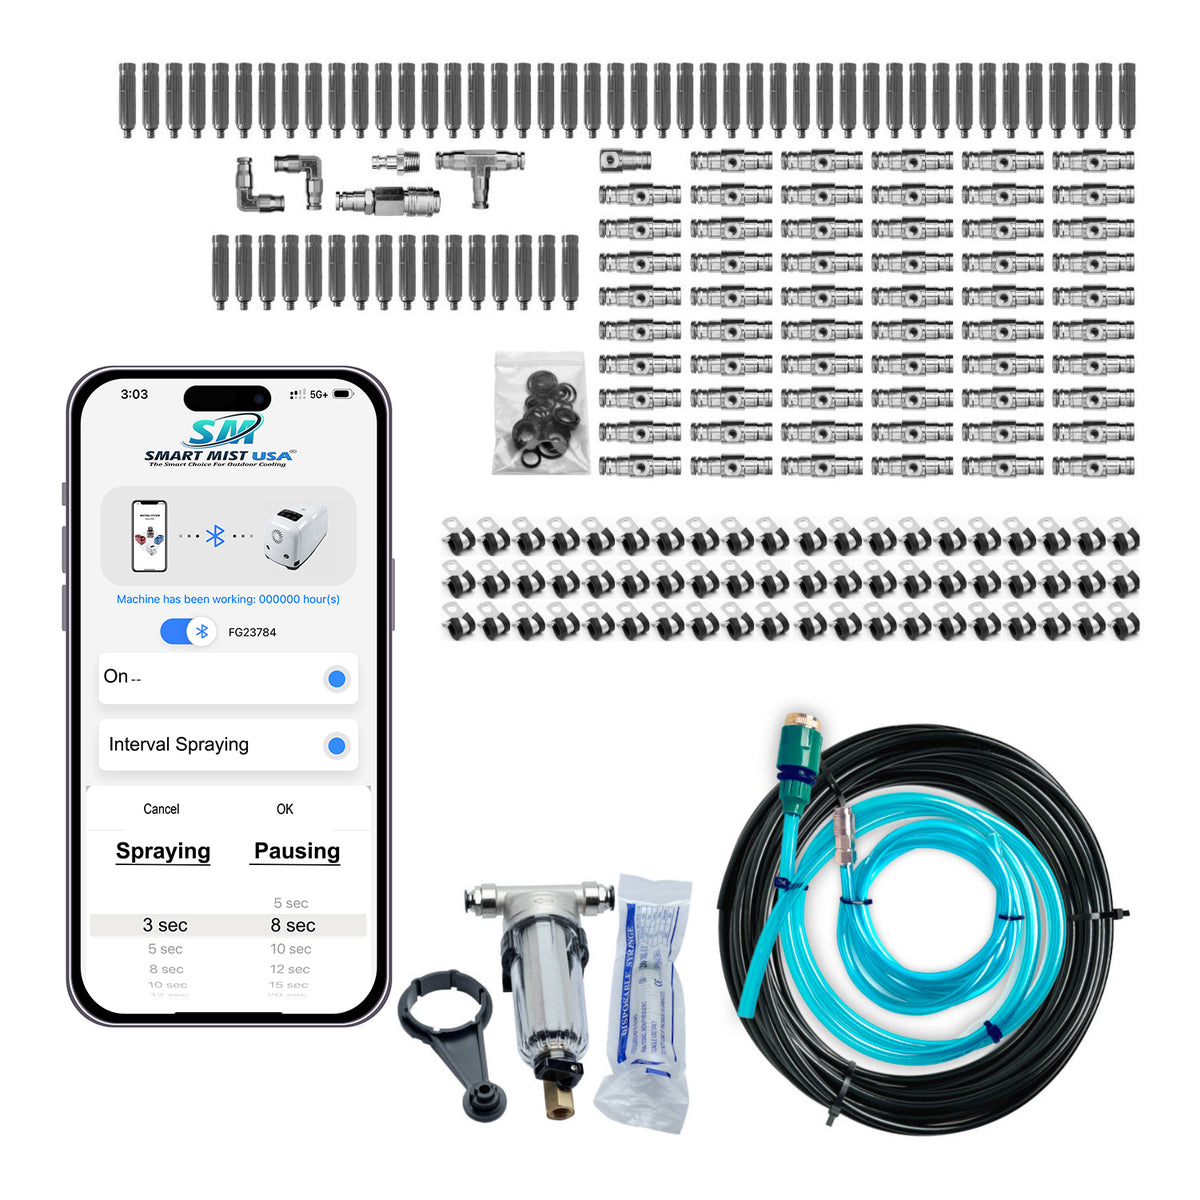 120 ft.- 60 nozzle high pressure misting system w/app control. DIY misting system  Kit with optional stainless steel tubing